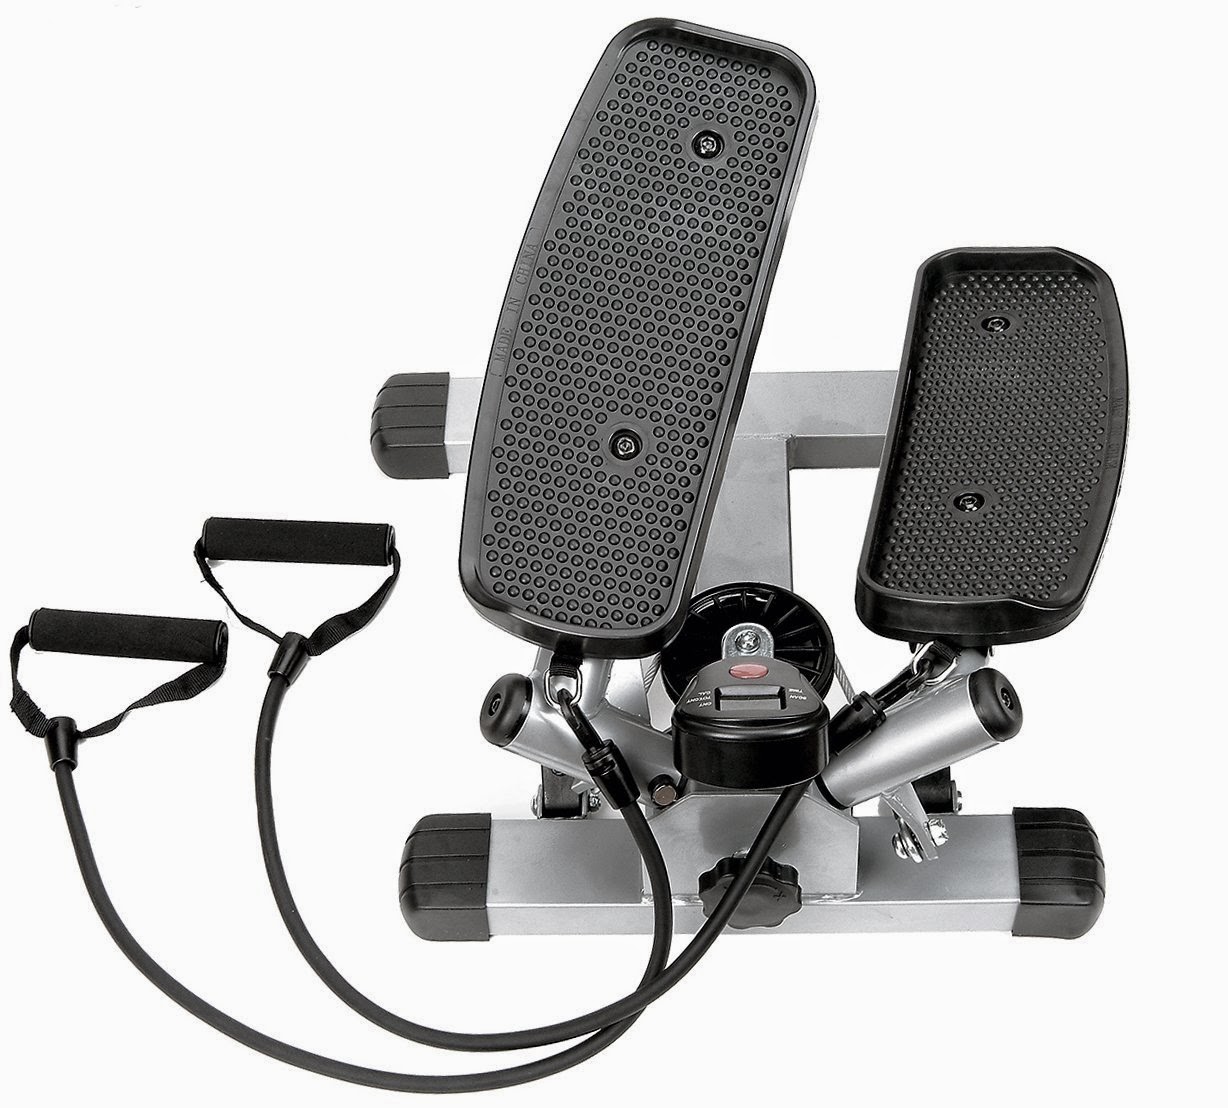 Sunny Health & Fitness Twister Stepper with Resistance Bands, review and compare with Sunny Twister Stepper with Handle Bar, tone your buttocks, legs, thighs, plus upper body workout